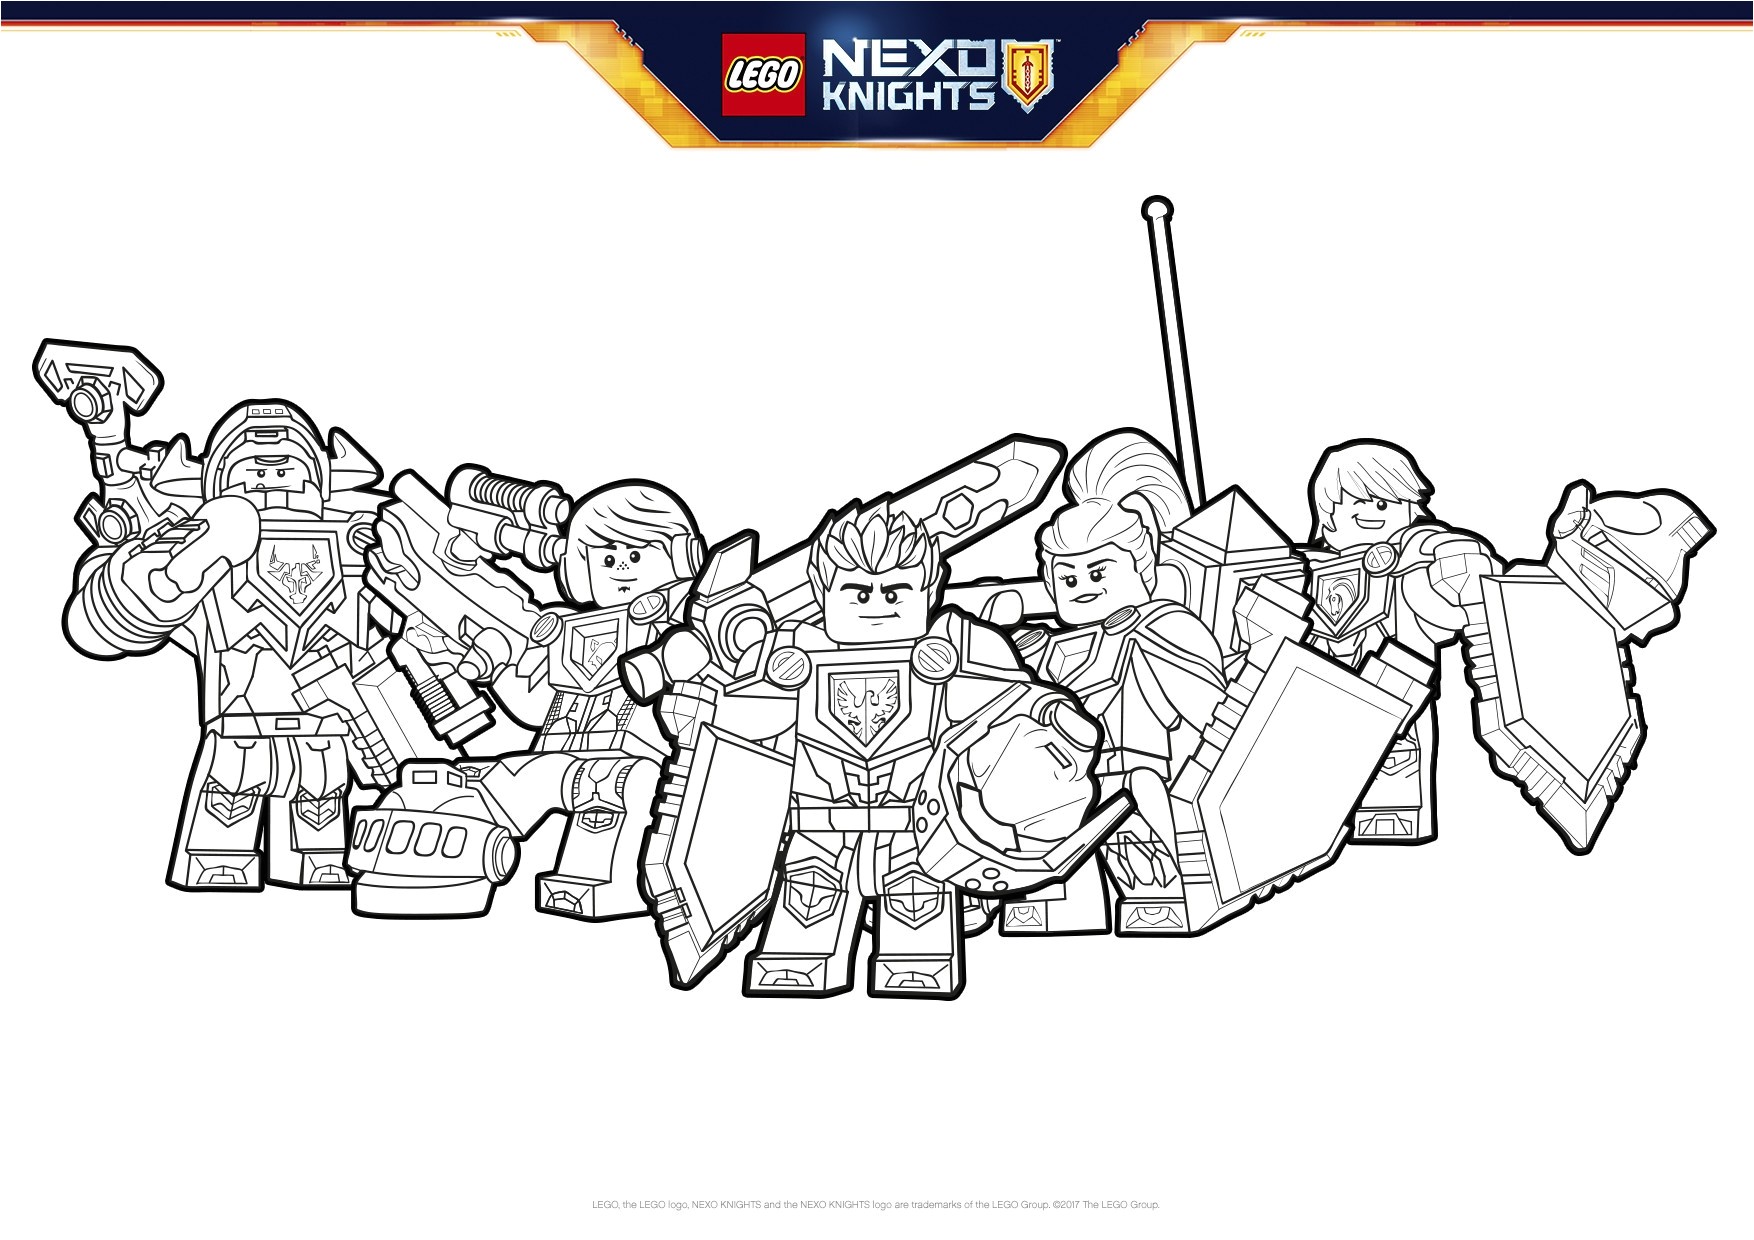 Coloring Pages Knights Beau Lego Nexo Knights formation 30 Coloring Pages Knights